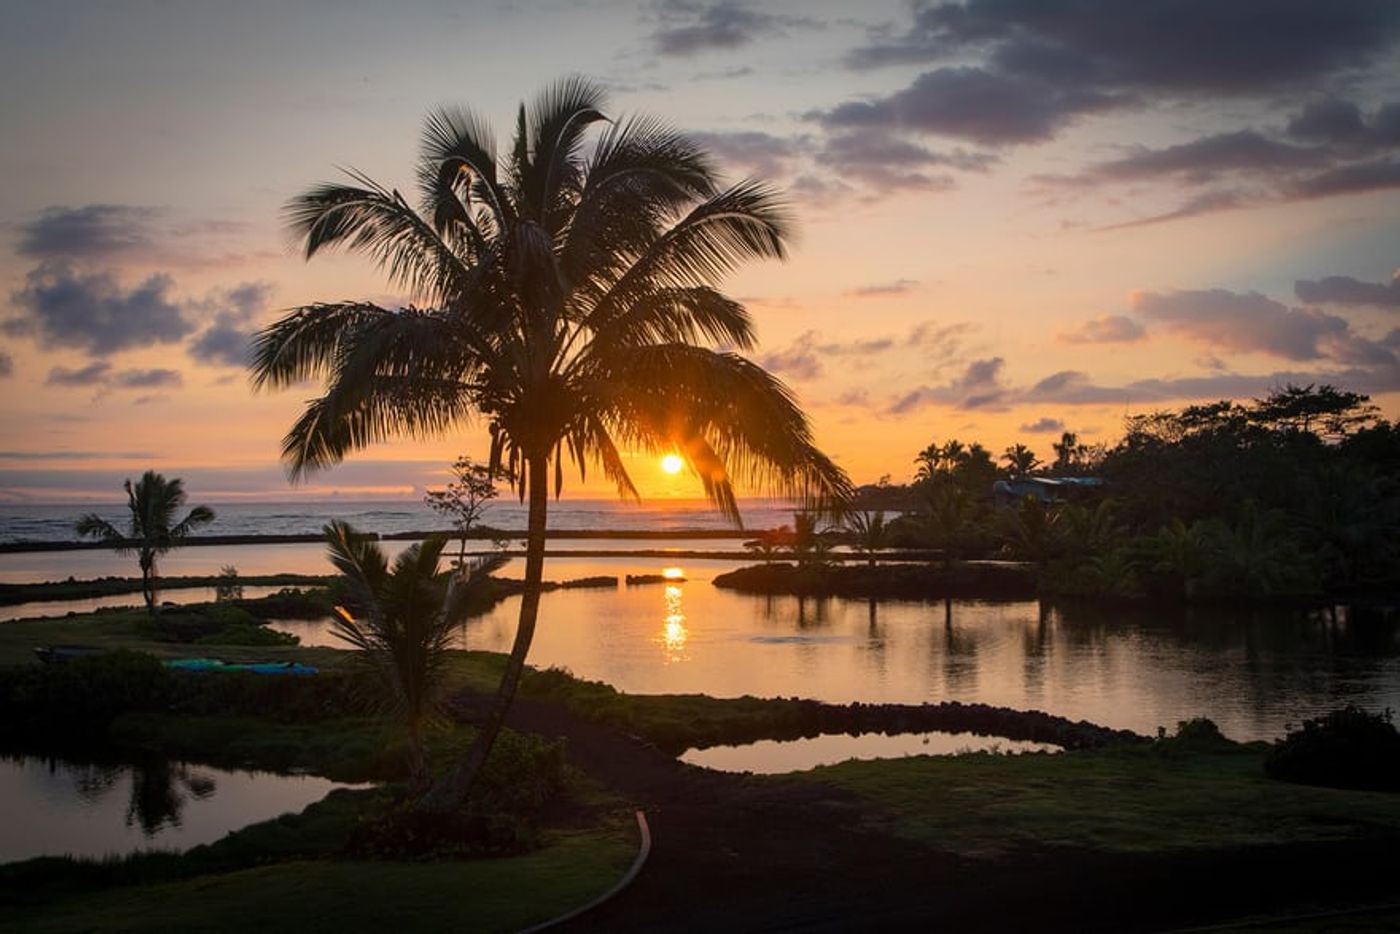 The Kapoho Bay tide pools before they were covered in lava. Photo: The Guardian